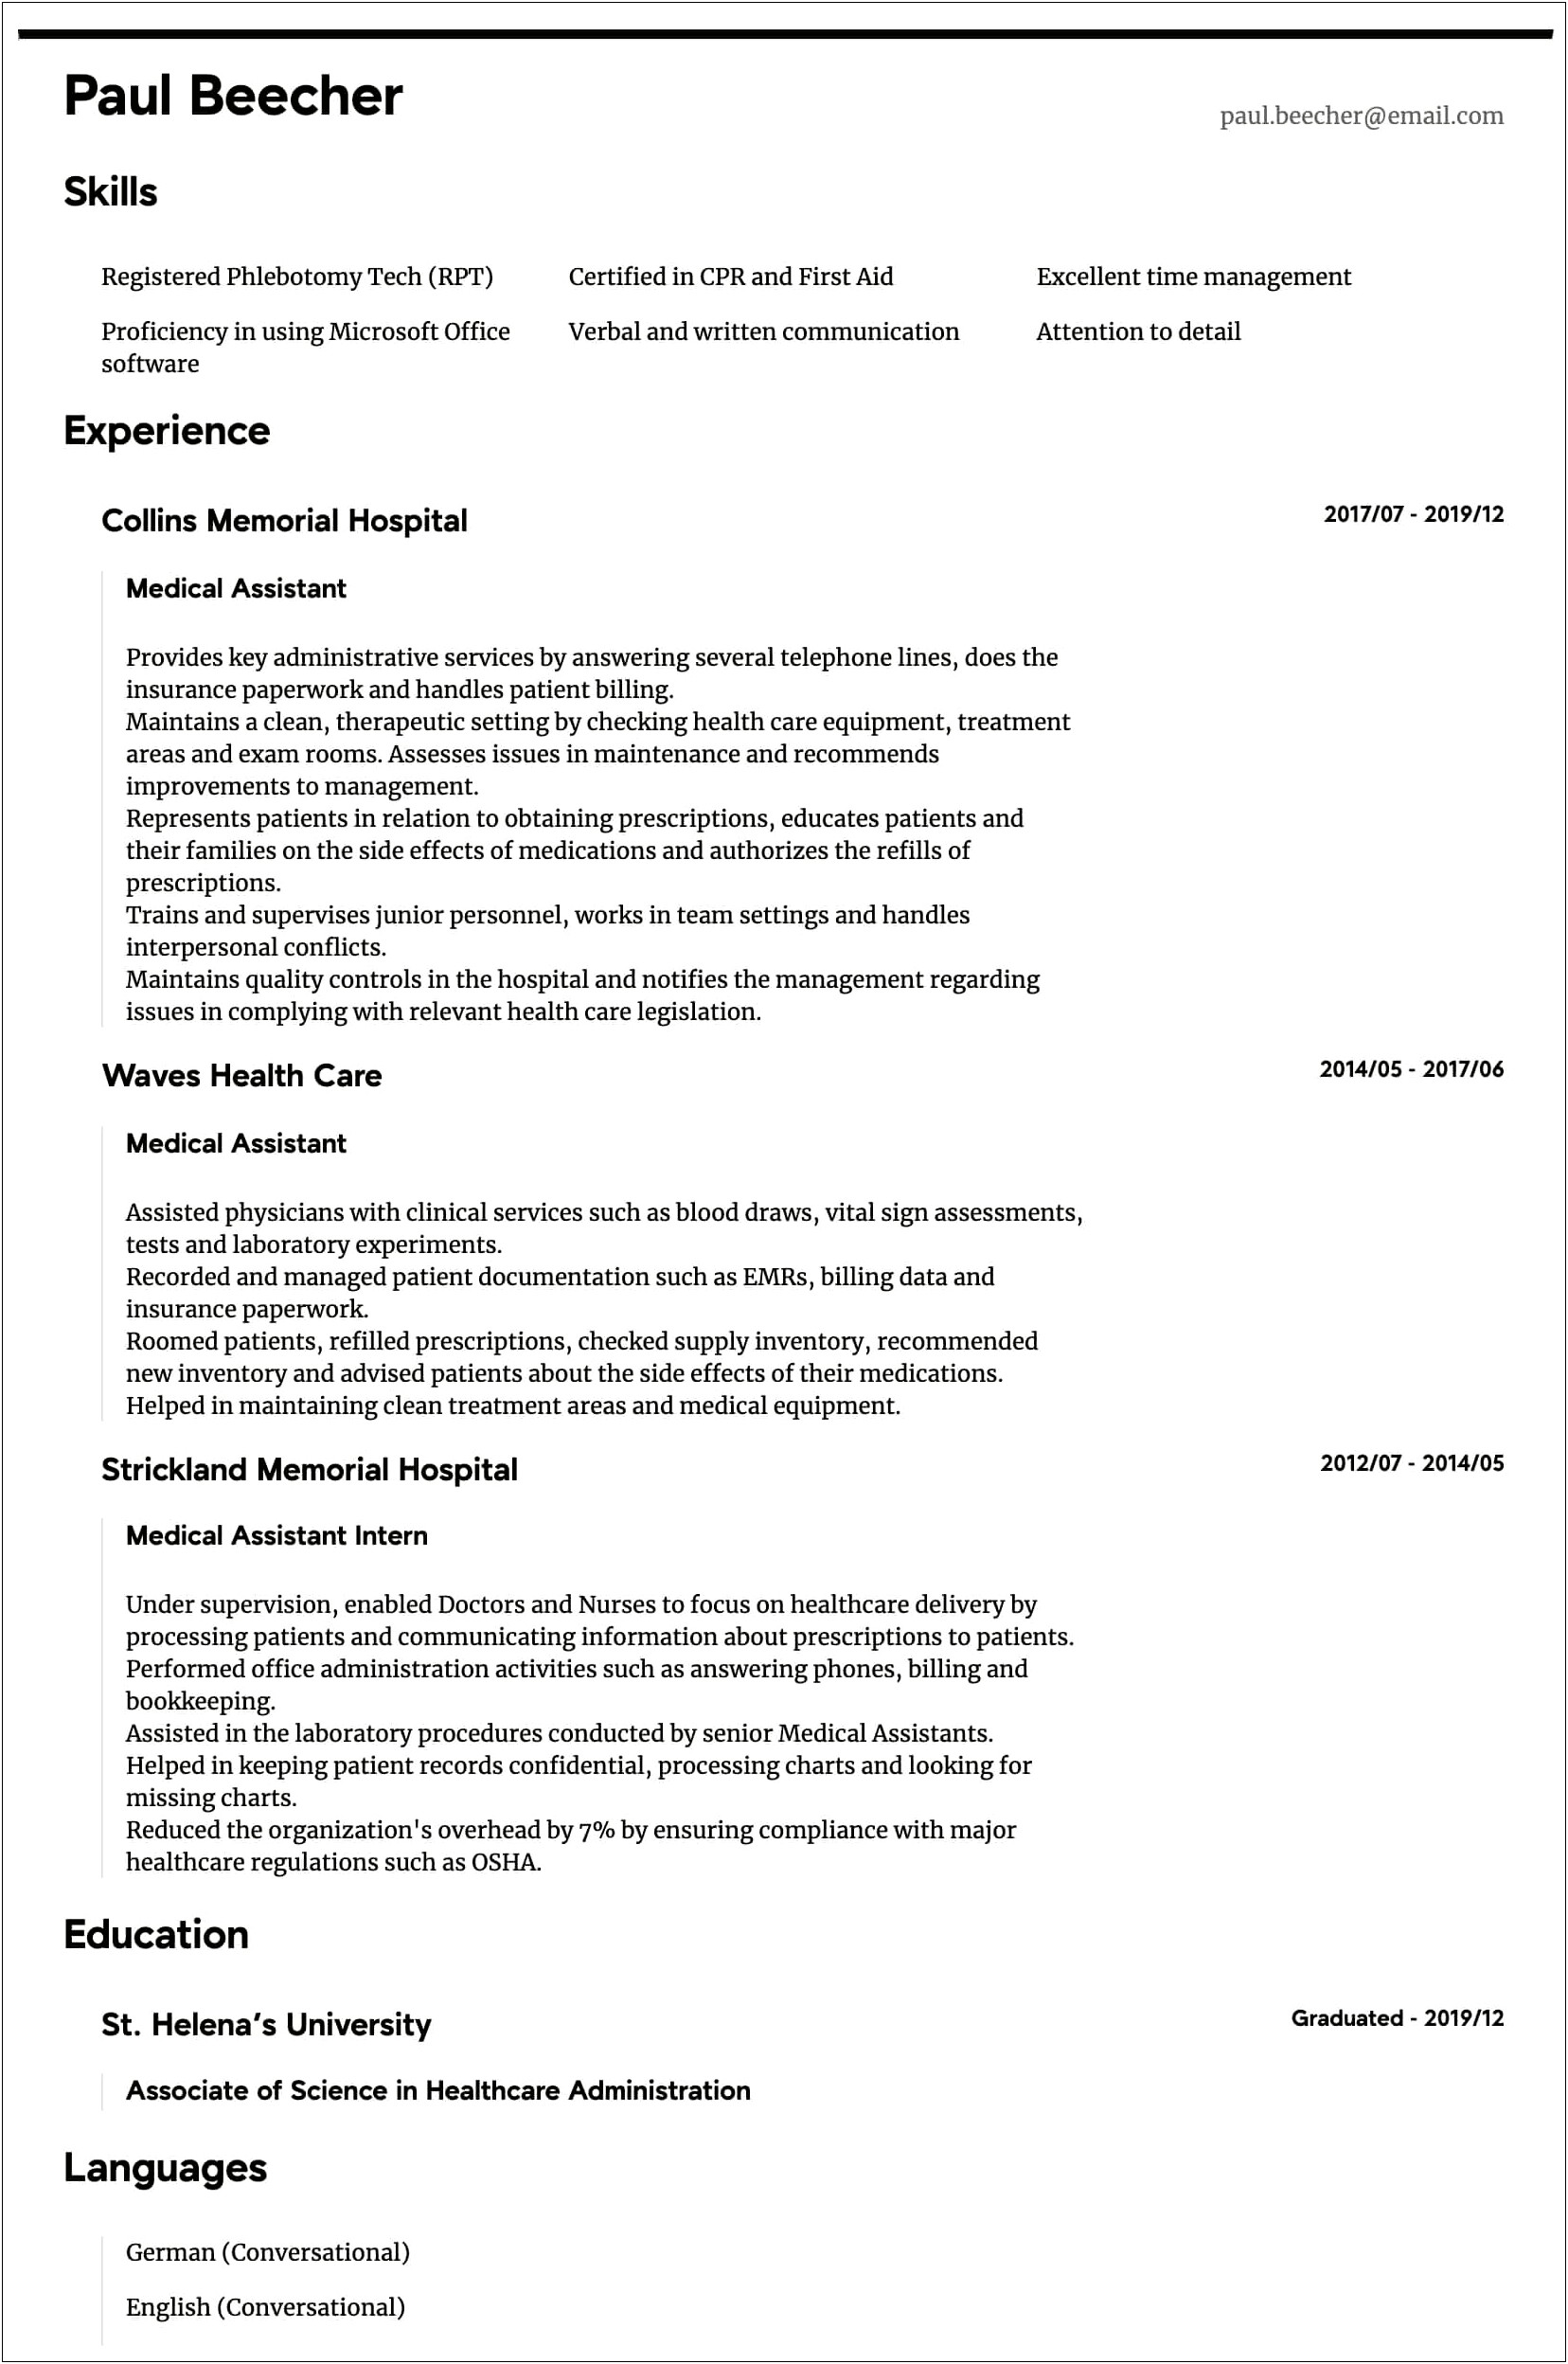 Health Care Assistant Resume Example